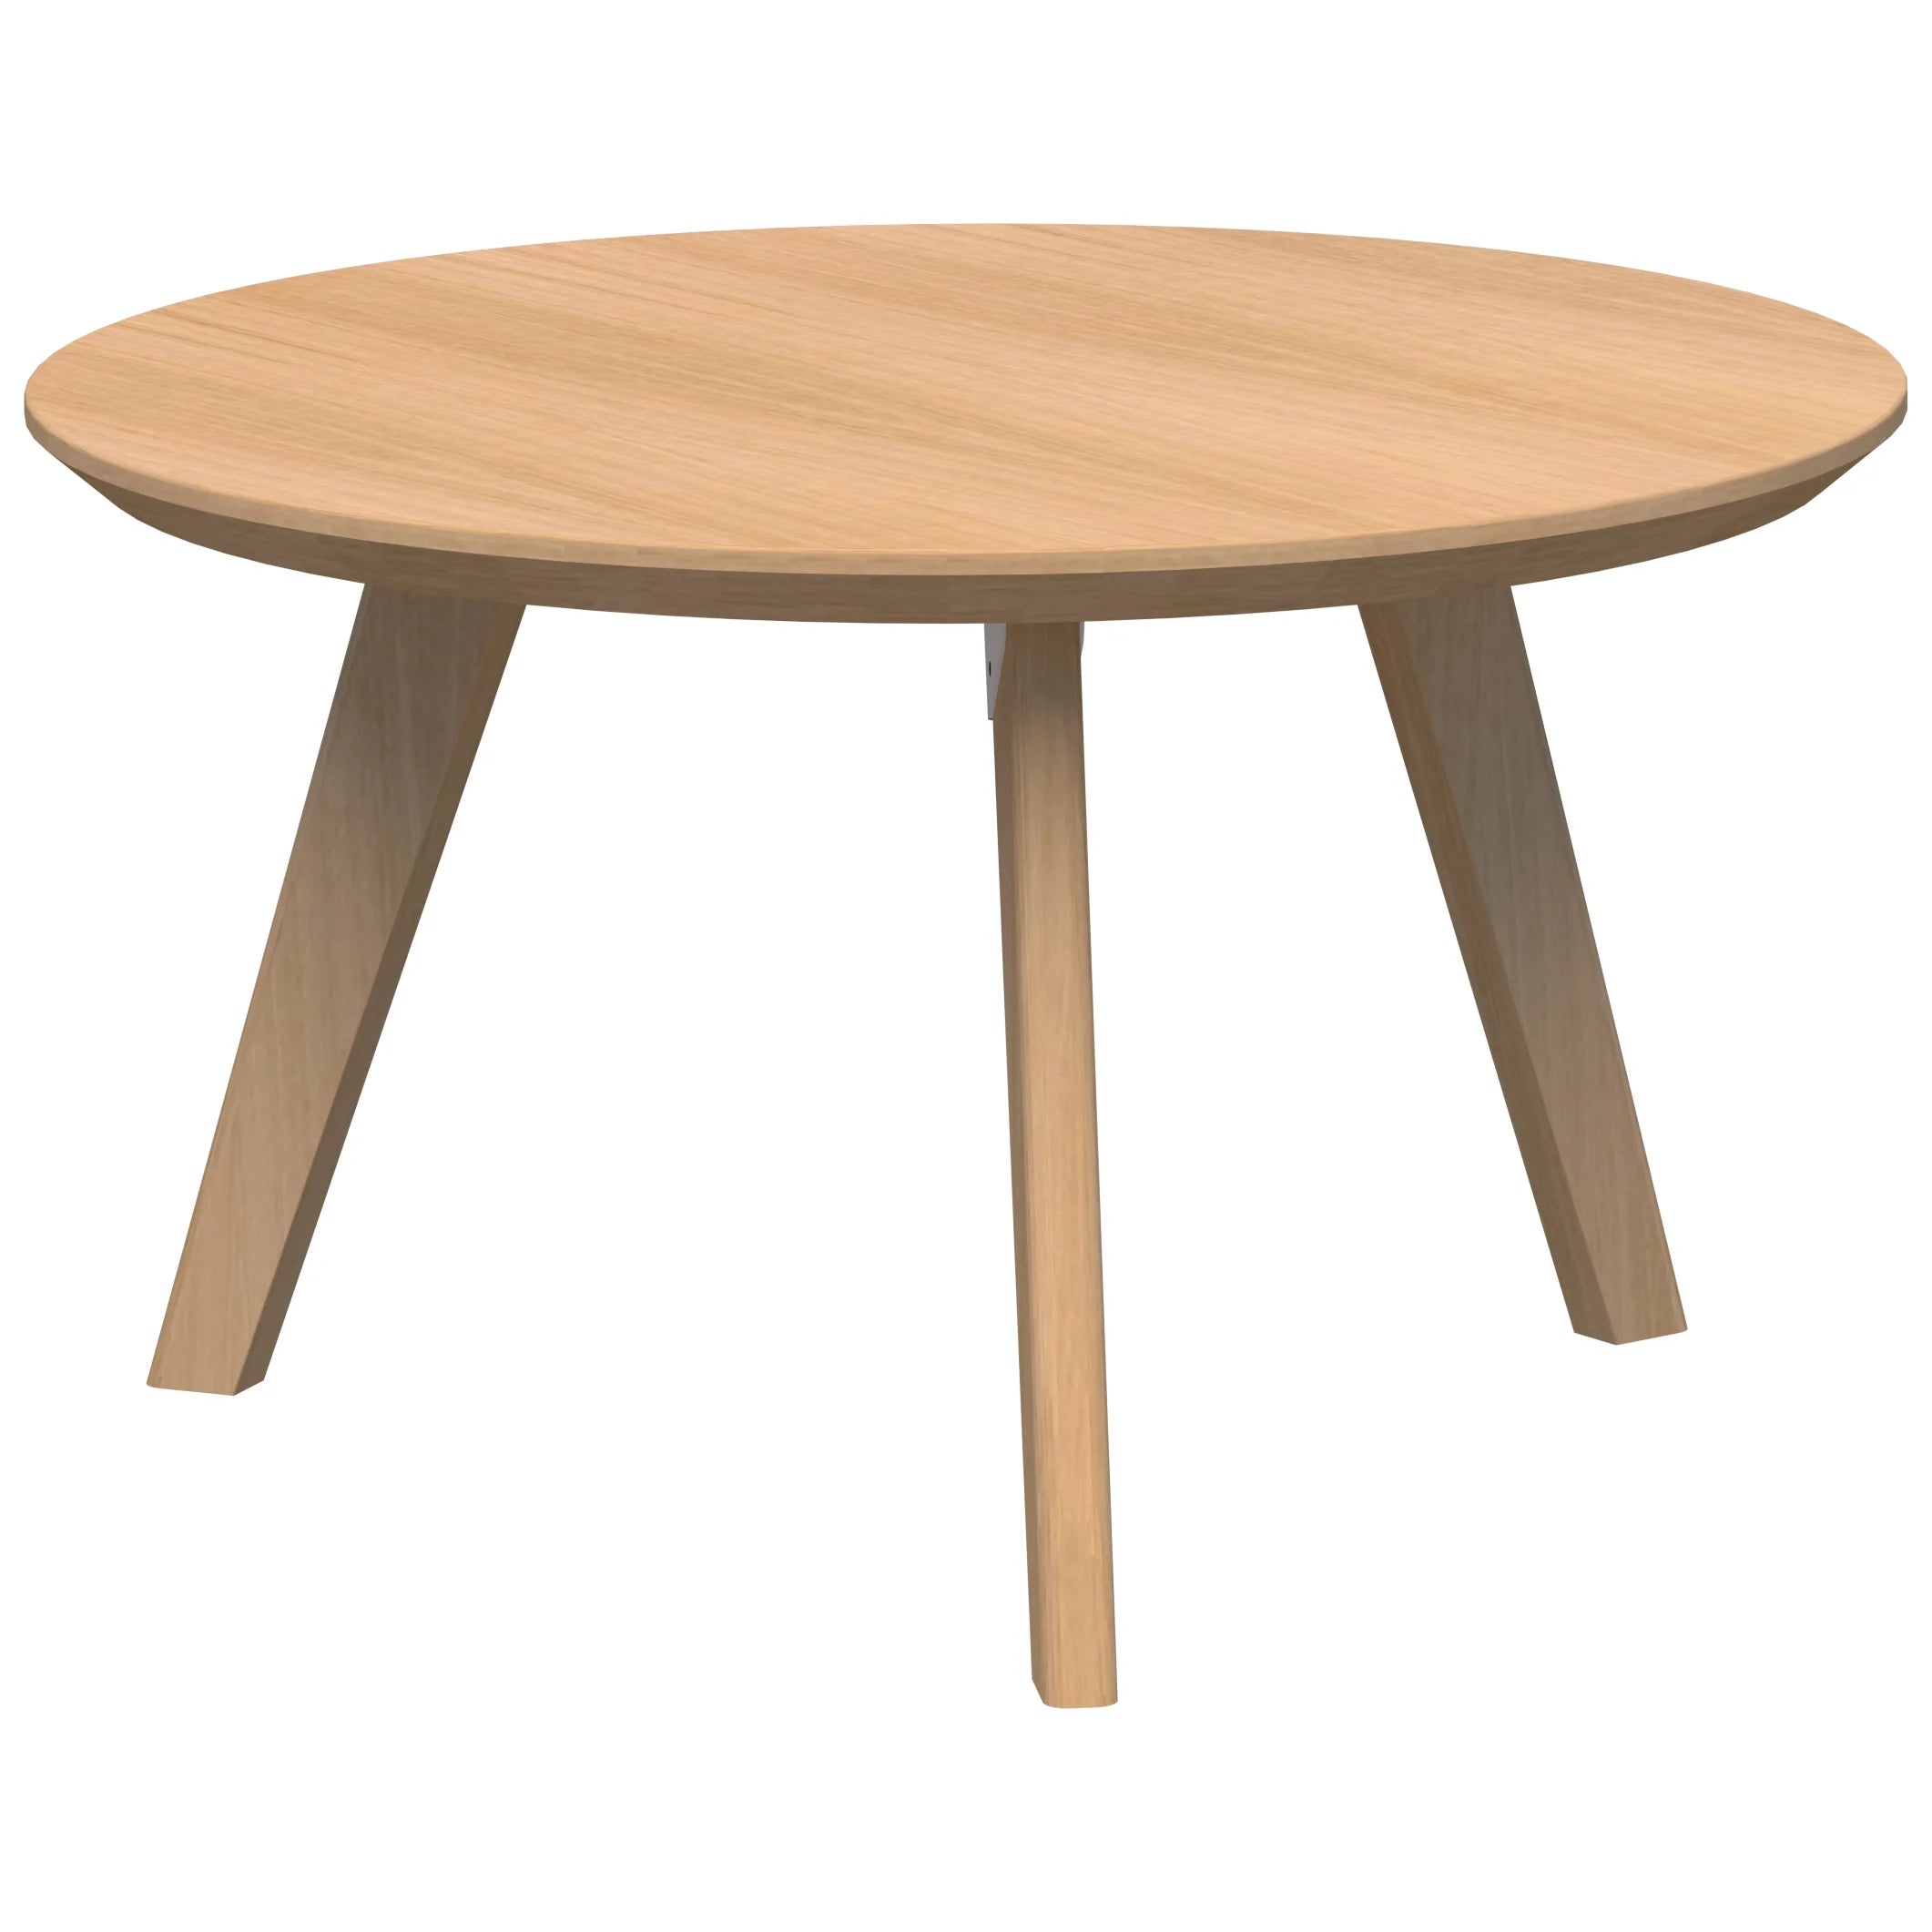 Oslo round coffee table with ash timber frame and veneer ash top.